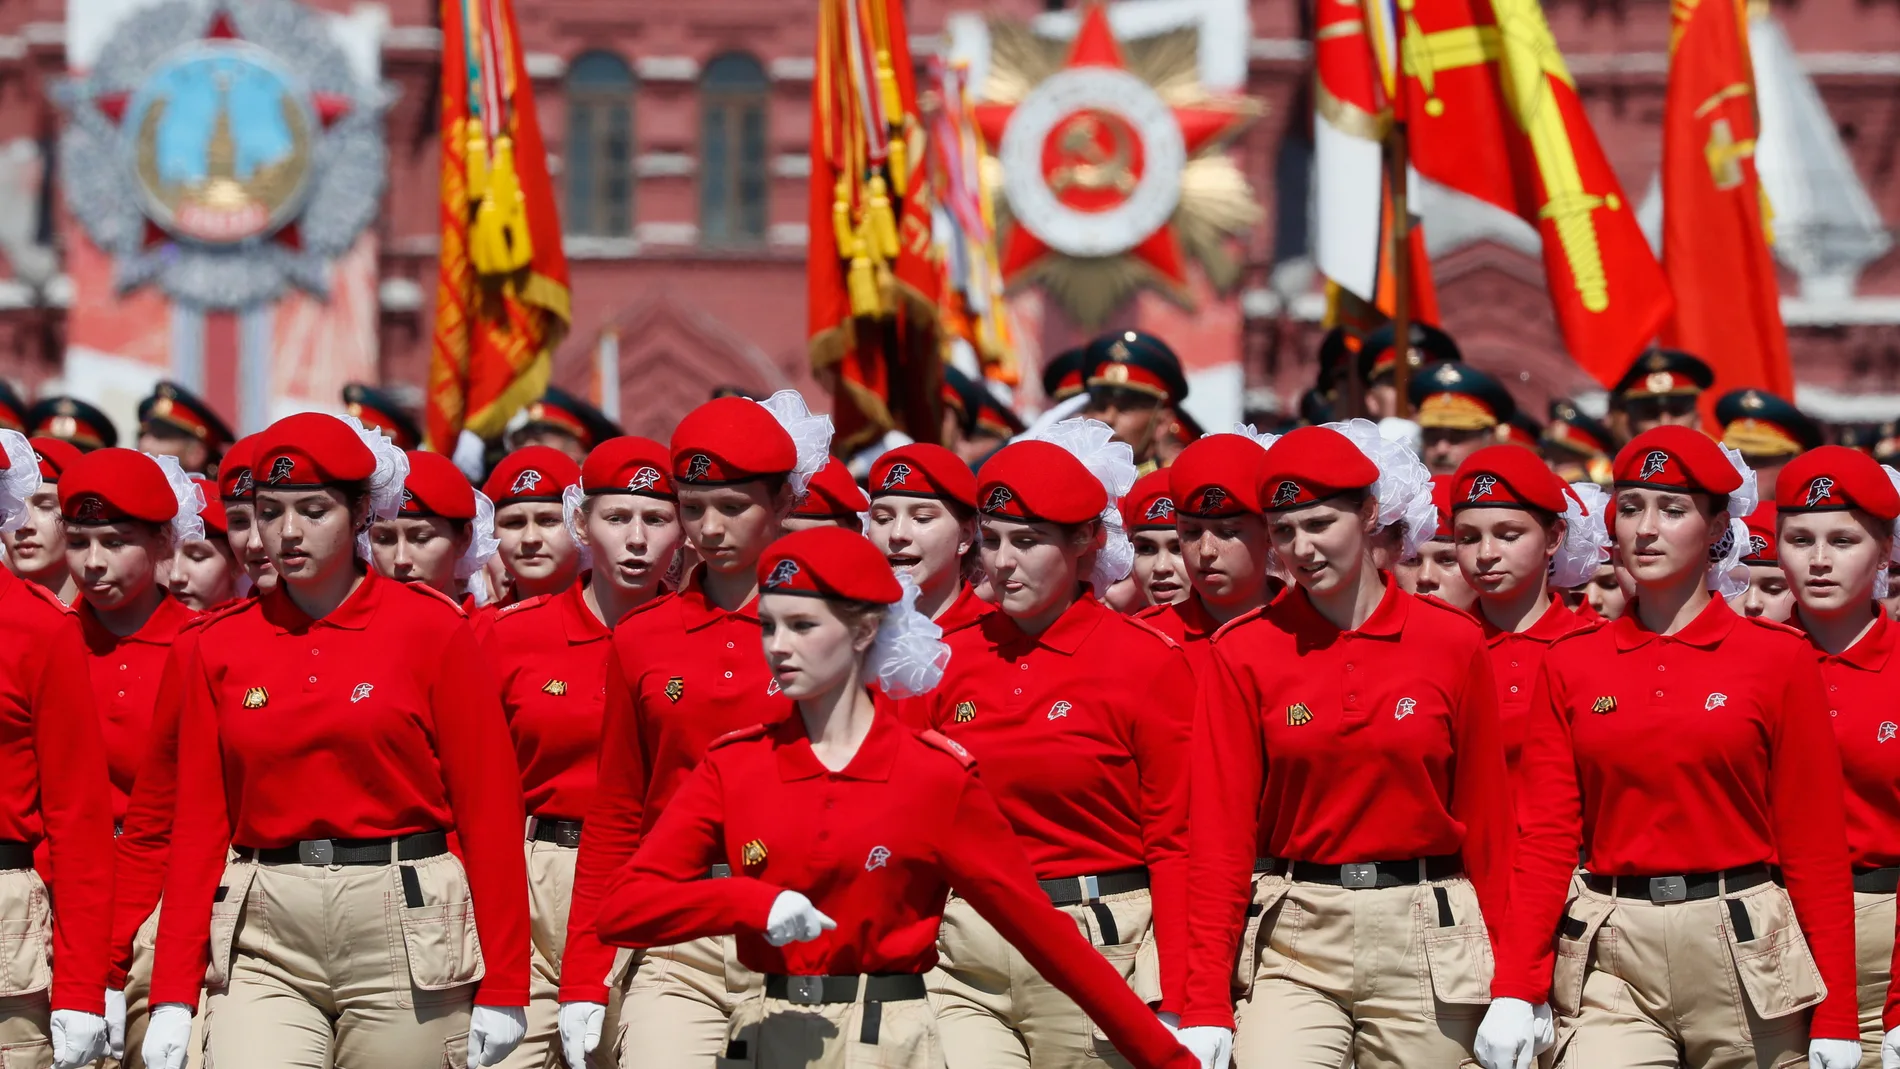 Members of youth patriotic movement Unarmia march during a military parade, marking the 75th anniversary of the Nazi defeat, in Moscow, Russia, 24 June 2020